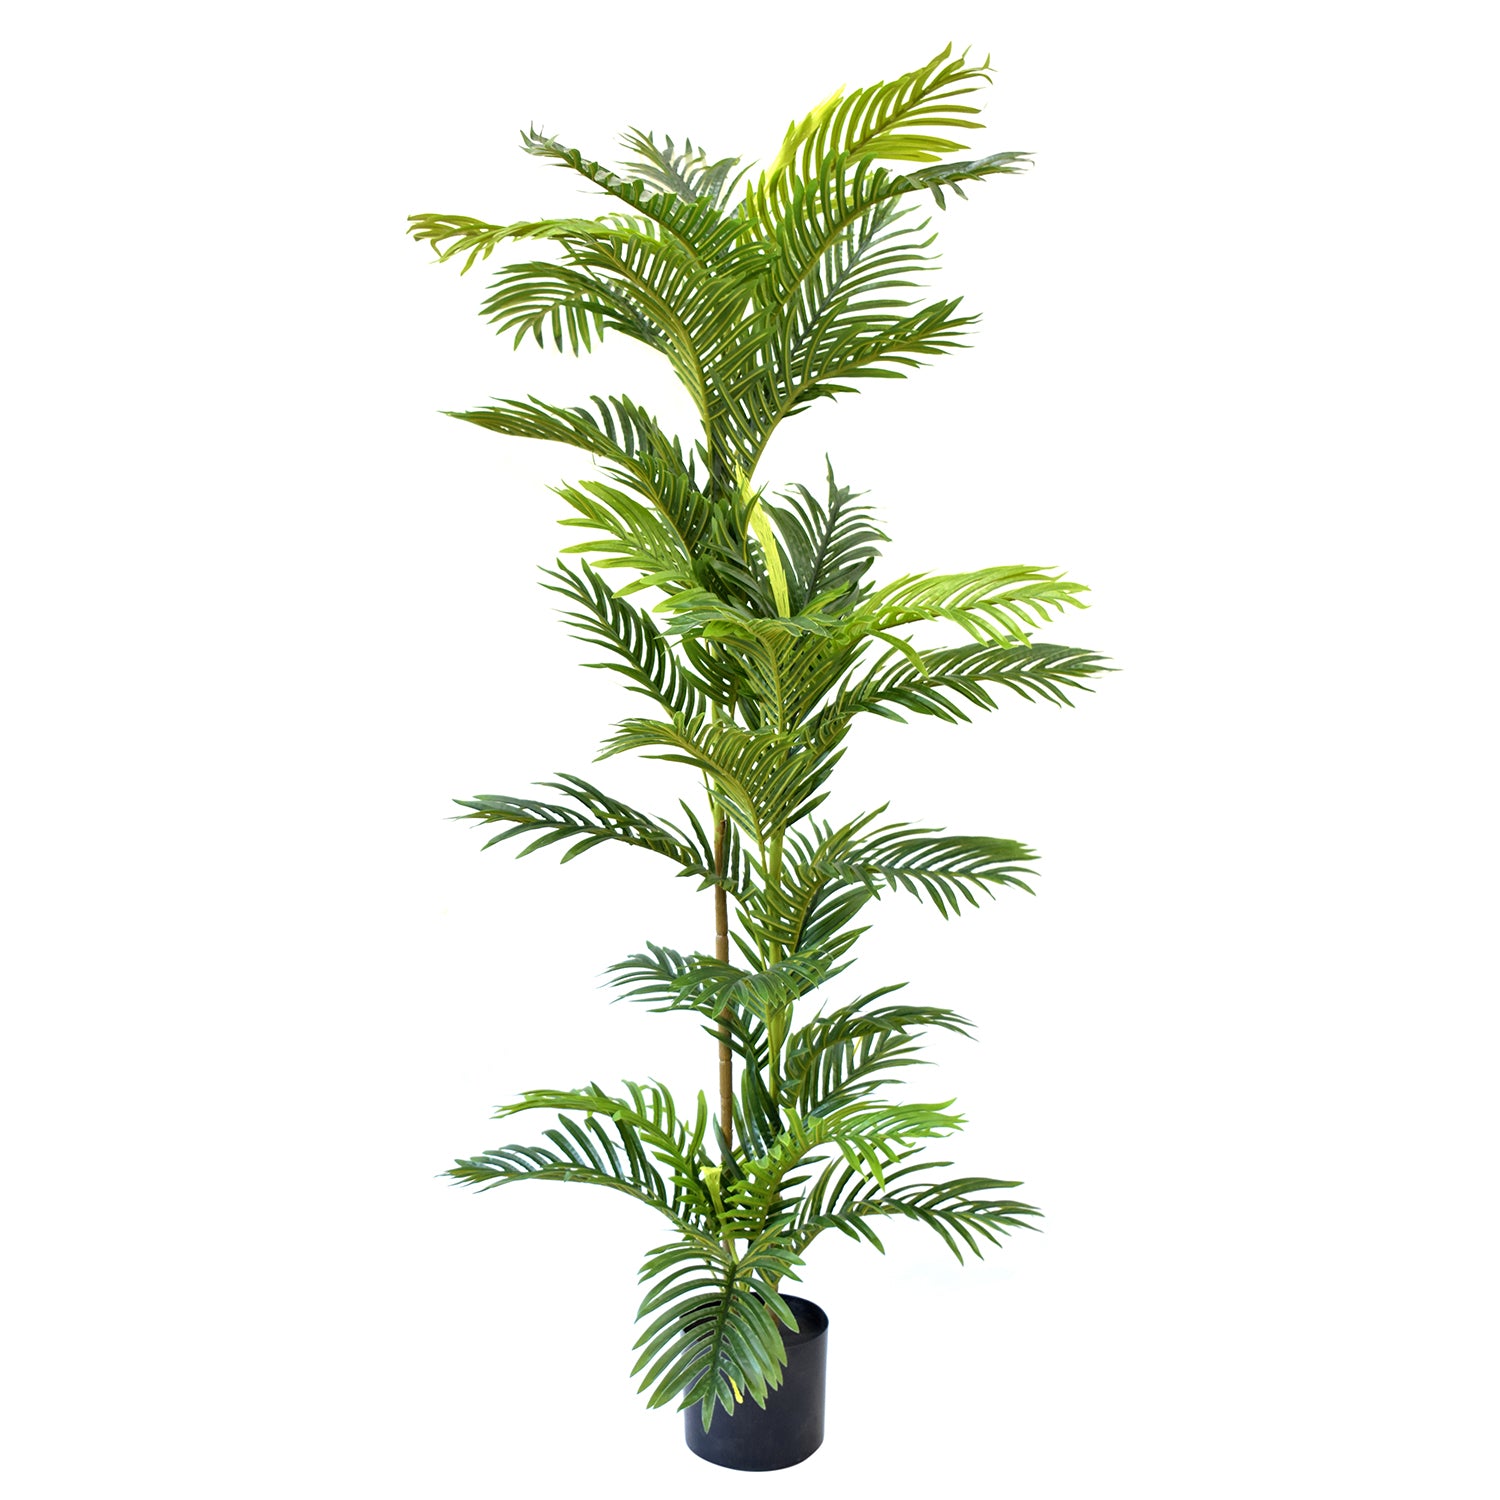 Aavana Greens Decorative Artificial Large Palm Plants Pack Of 1